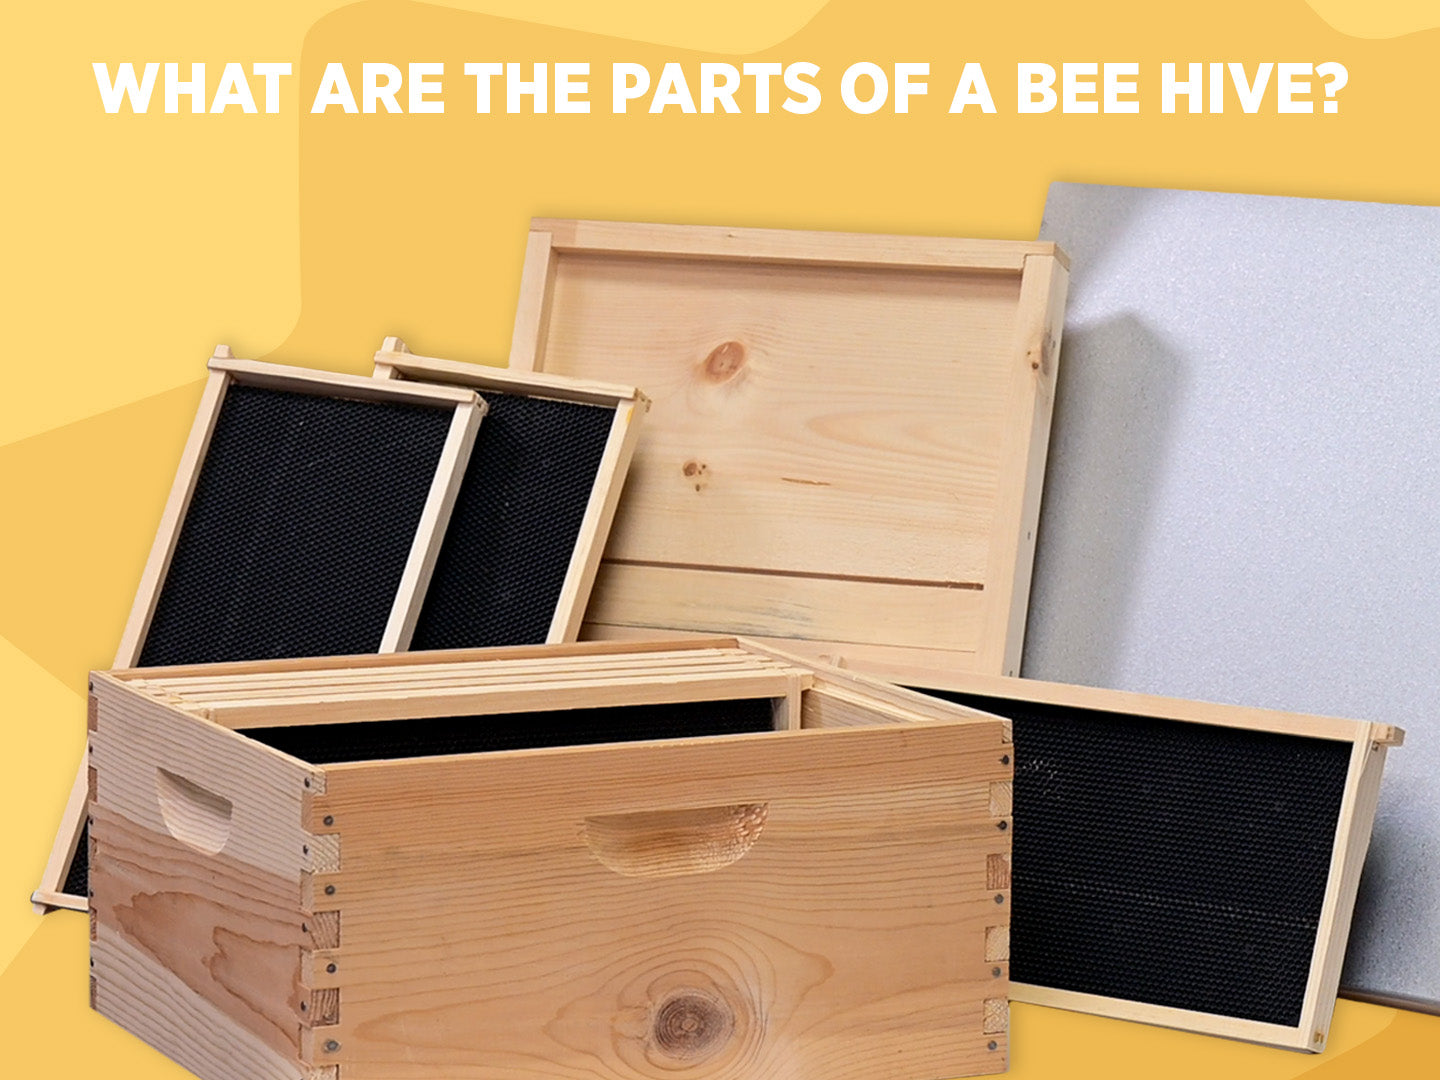 What Are the Parts of a Bee Hive?